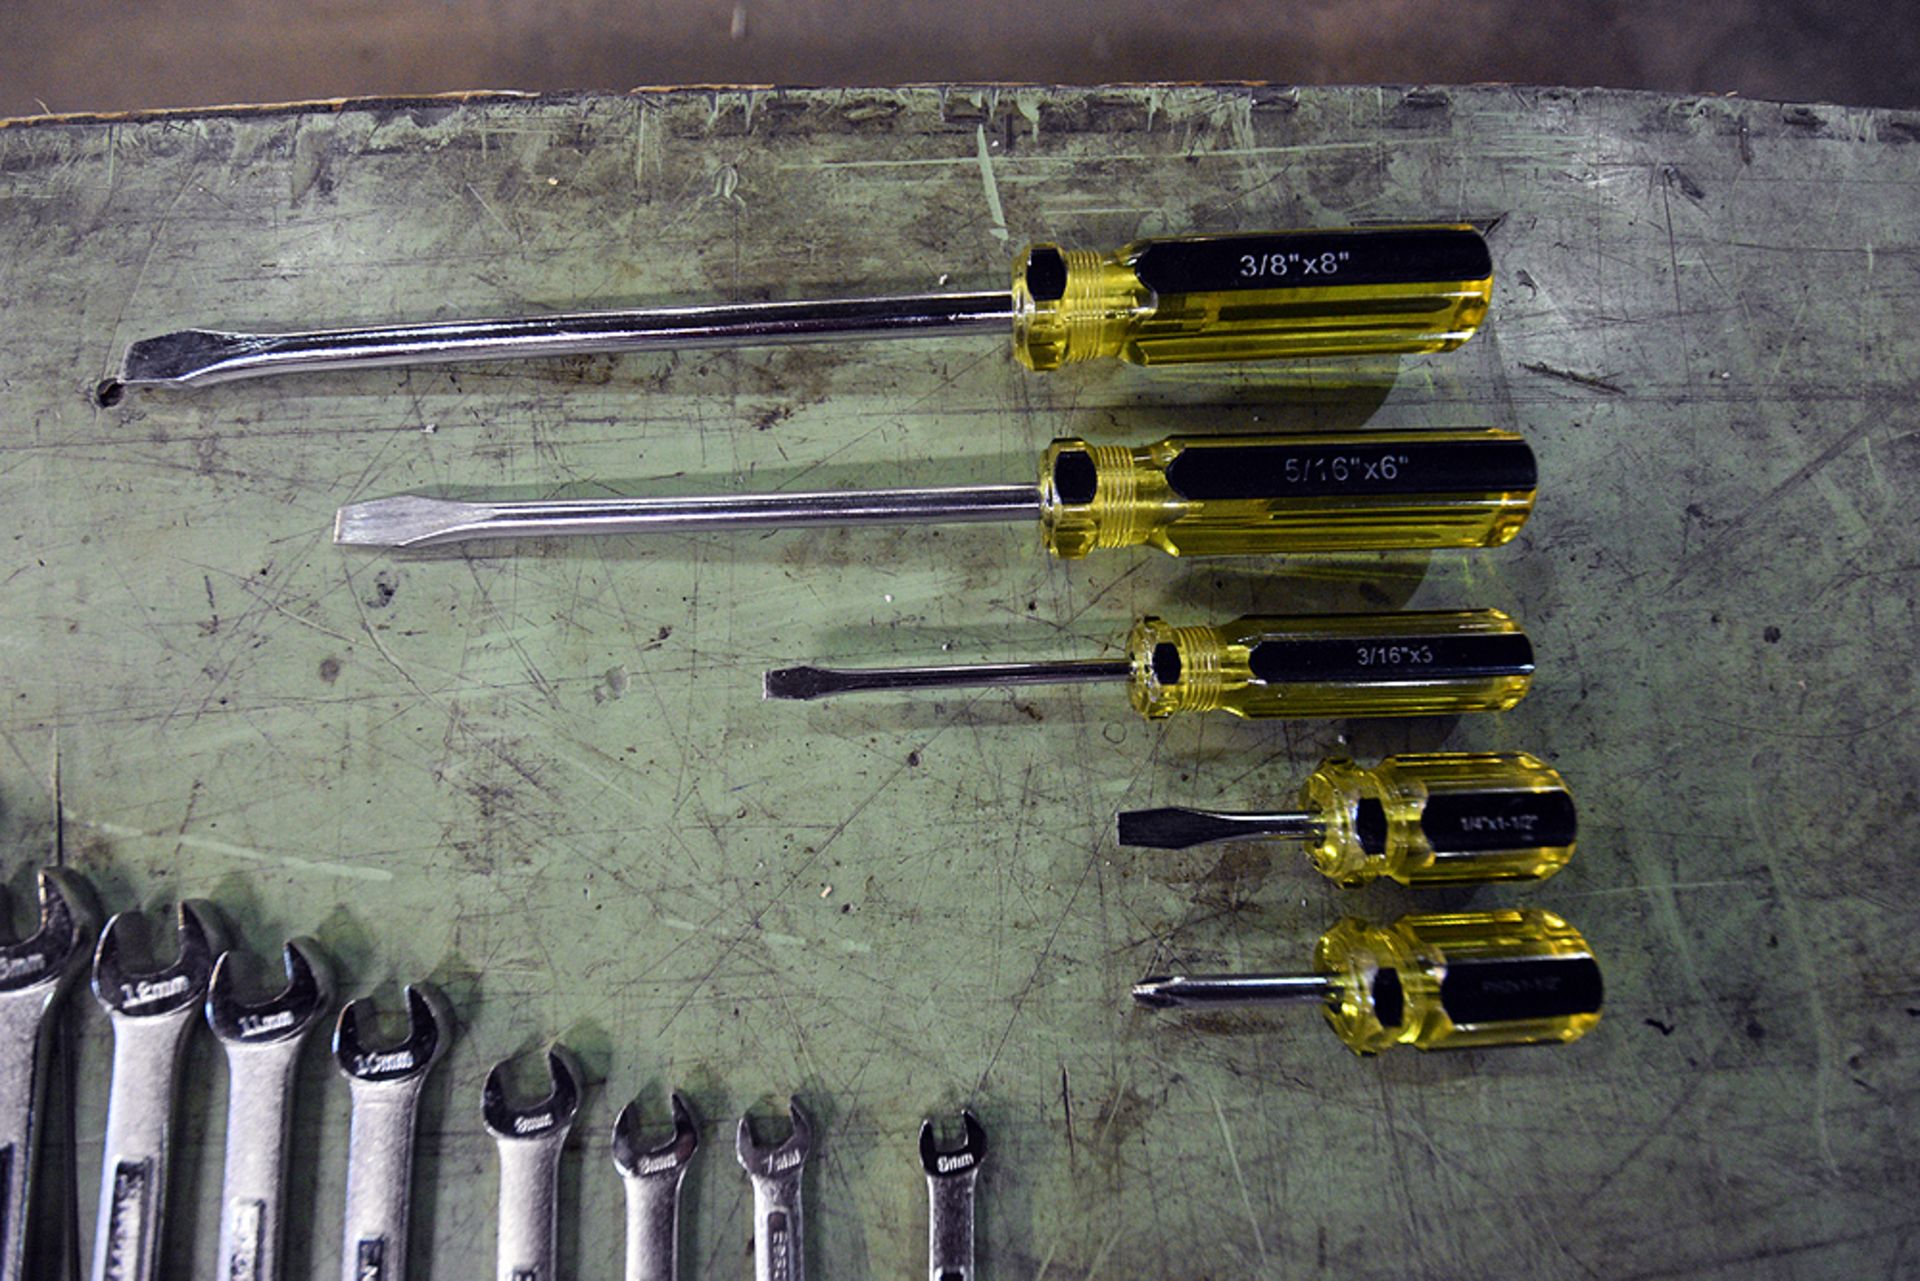 (1)14 pc Combination Wrench Set (8mm-30mm) w/ Ass't Wrenches, Screwdrivers, and Allen Keys - Image 4 of 5